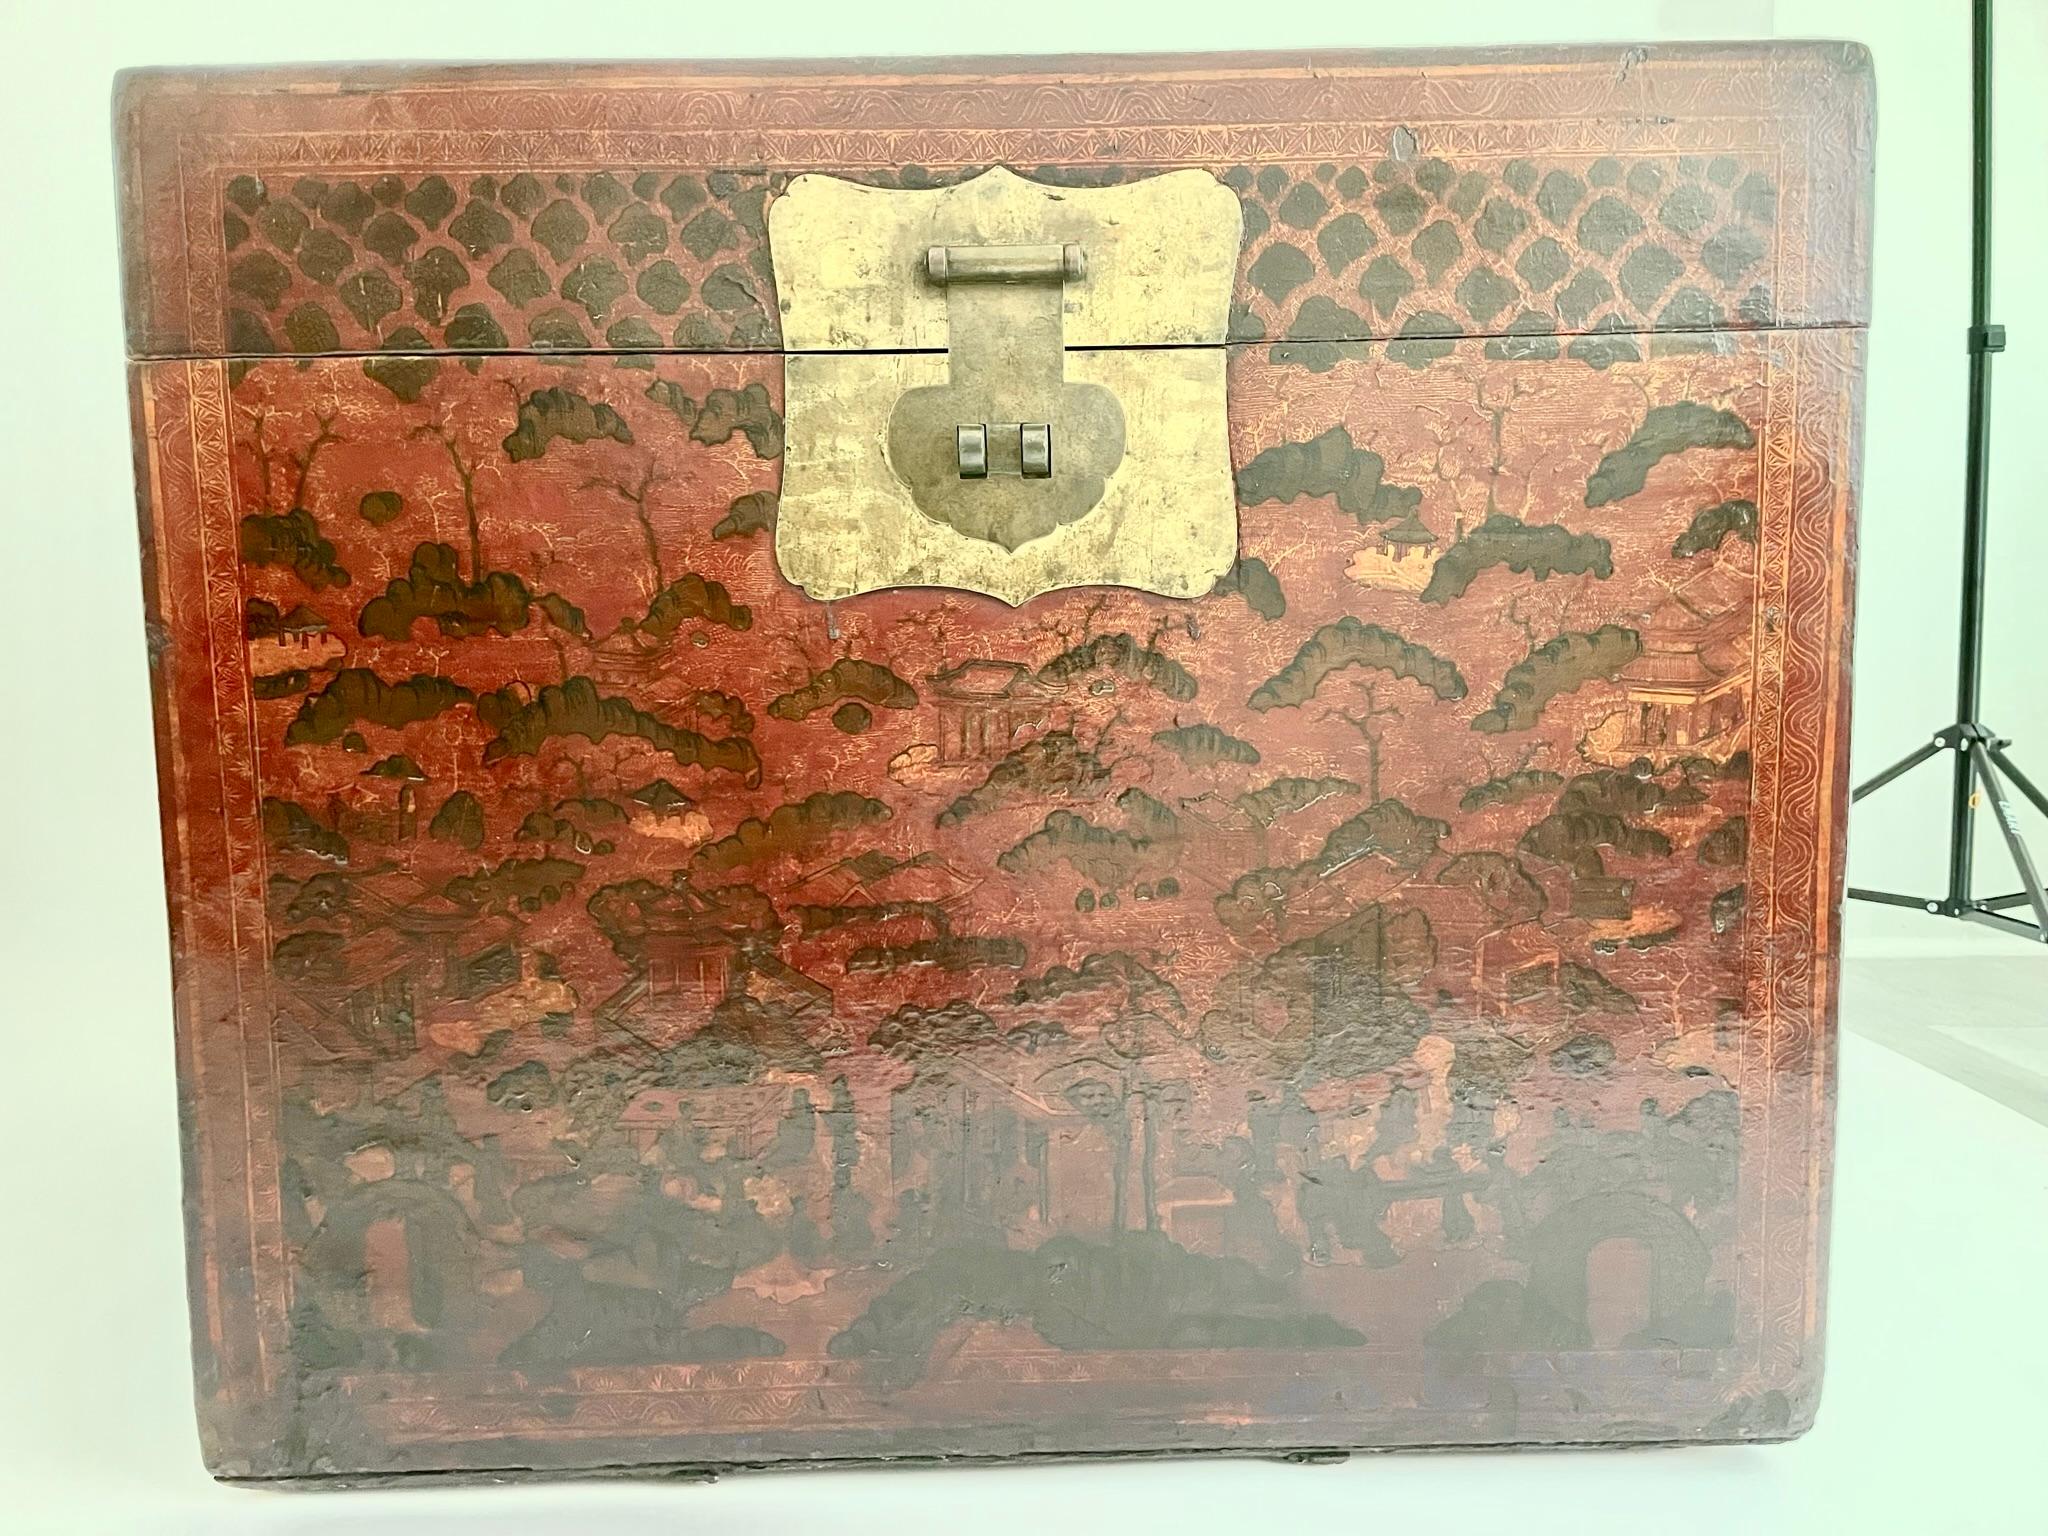 This extremely large Qing Dynasty leather trunk is beautifully painted with a tradition Chinese landscape scene over the oxblood color painted leather. The interior top is painted as well with a Chinese garden scene. The trunk is constructed in